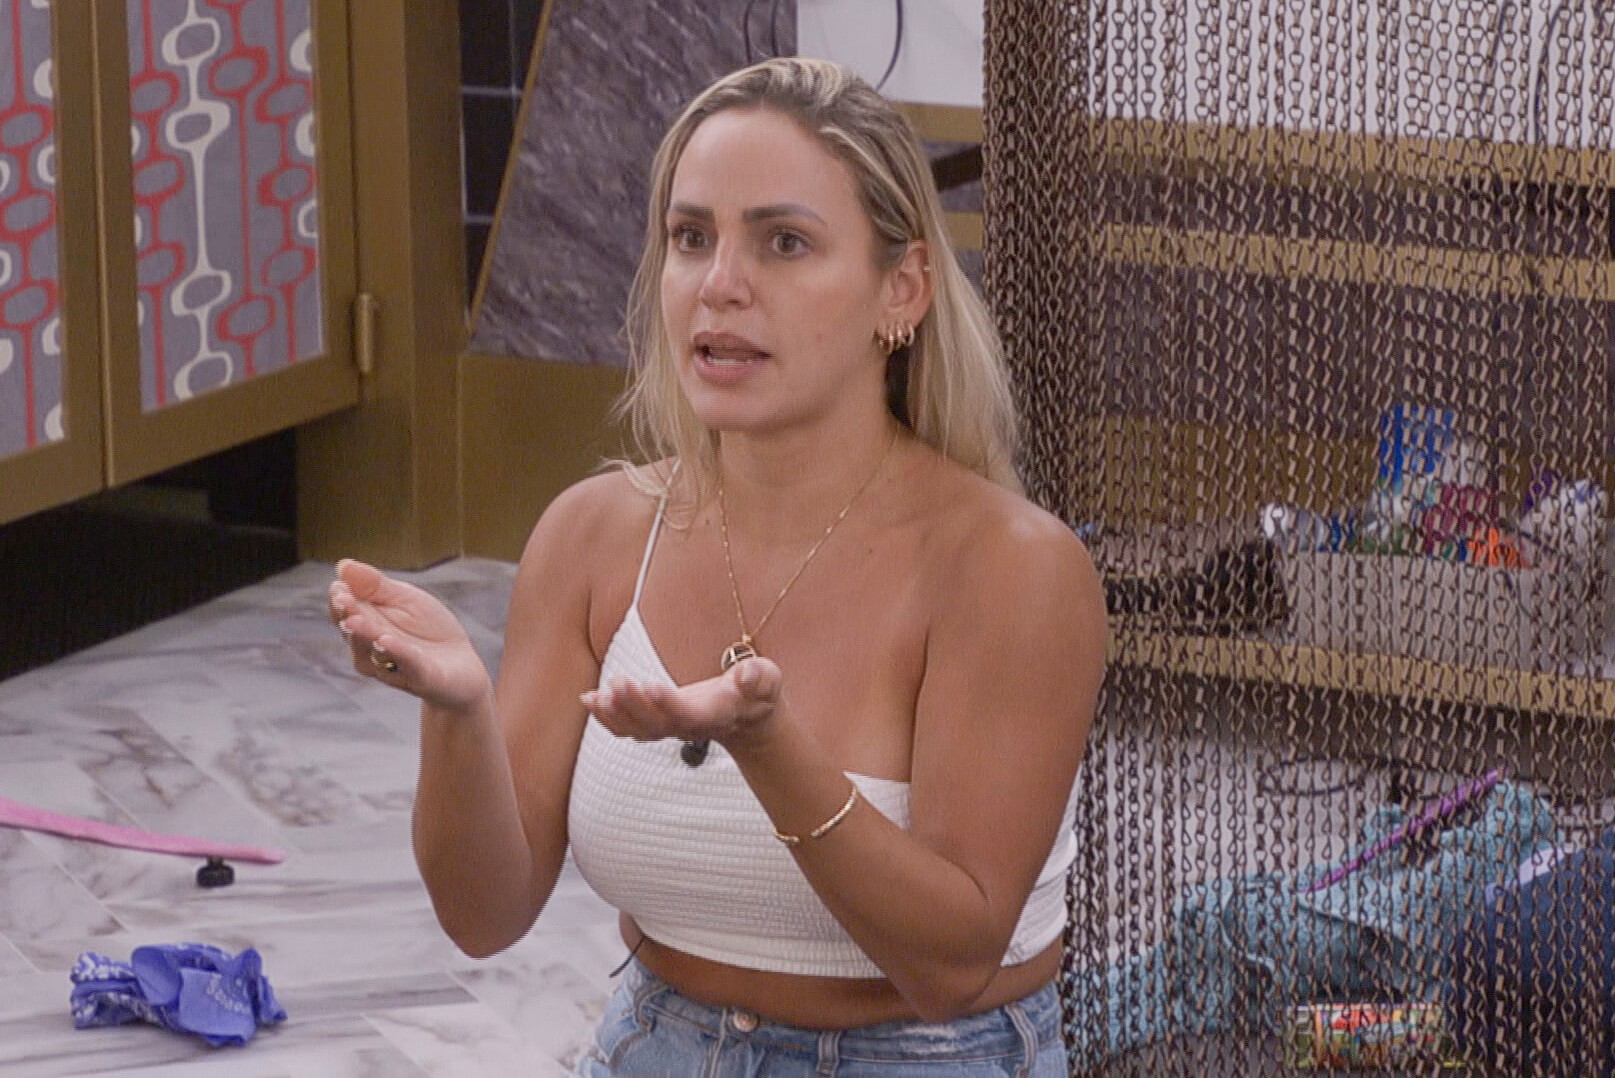 Indy Santos wears a cropped white tank top and jeans. Indy, according 'Big Brother 24' spoilers, wasn't happy with Brittany on Thursday, July 28.